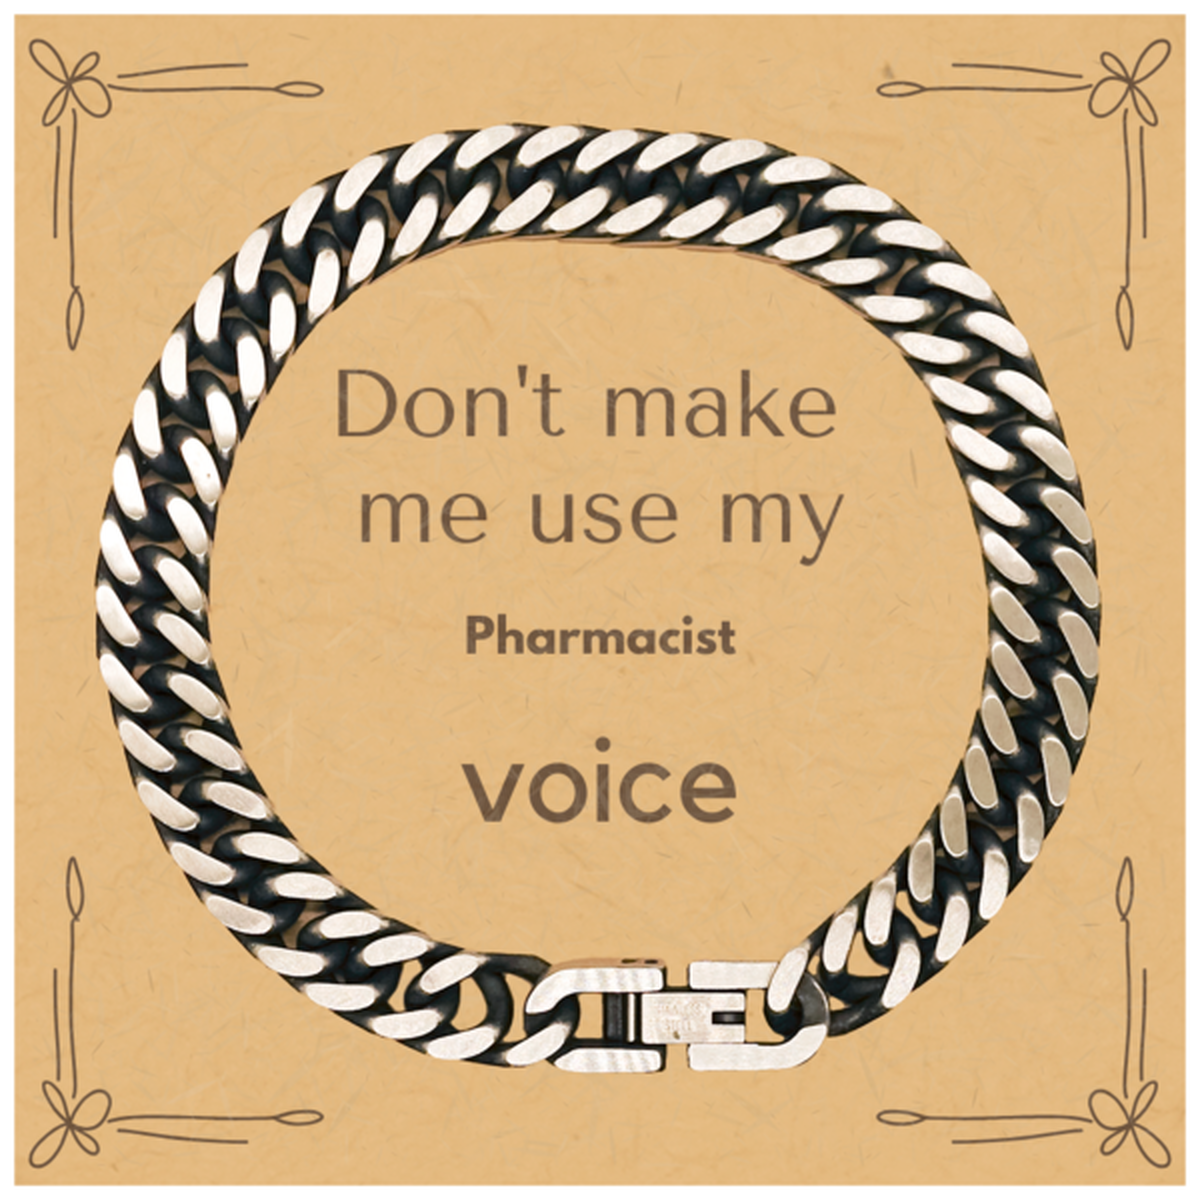 Don't make me use my Pharmacist voice, Sarcasm Pharmacist Card Gifts, Christmas Pharmacist Cuban Link Chain Bracelet Birthday Unique Gifts For Pharmacist Coworkers, Men, Women, Colleague, Friends